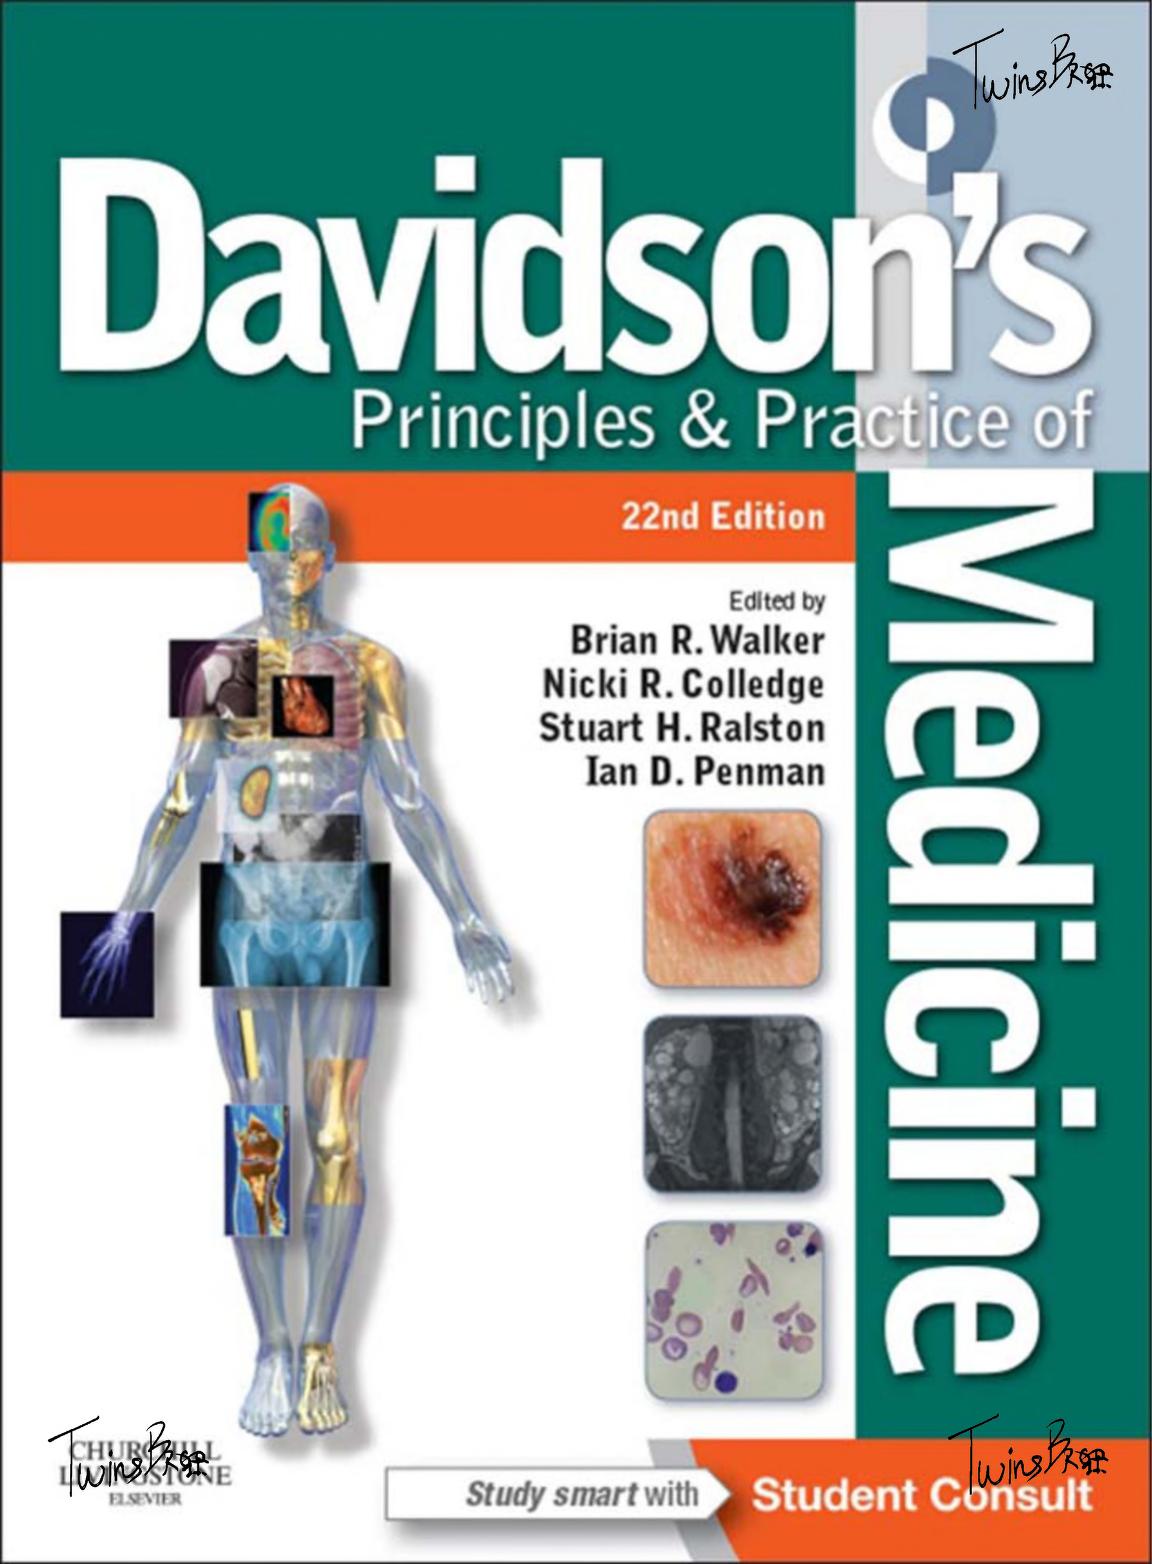 Davidson’s Principles and Practice of Medicine 22nd Edition